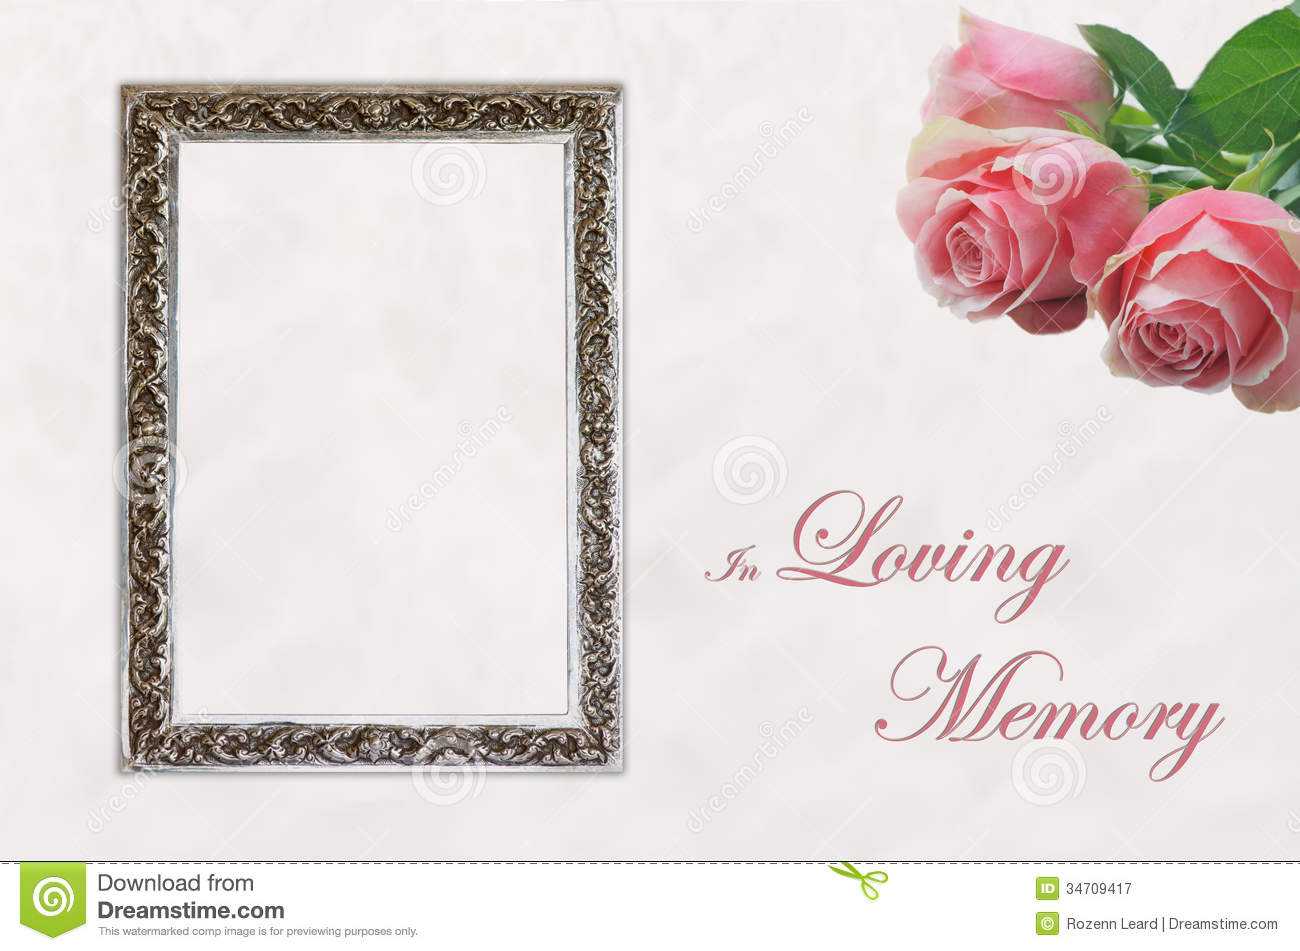 Funeral Eulogy Card Stock Image. Image Of Loving, Flowers For In Memory Cards Templates